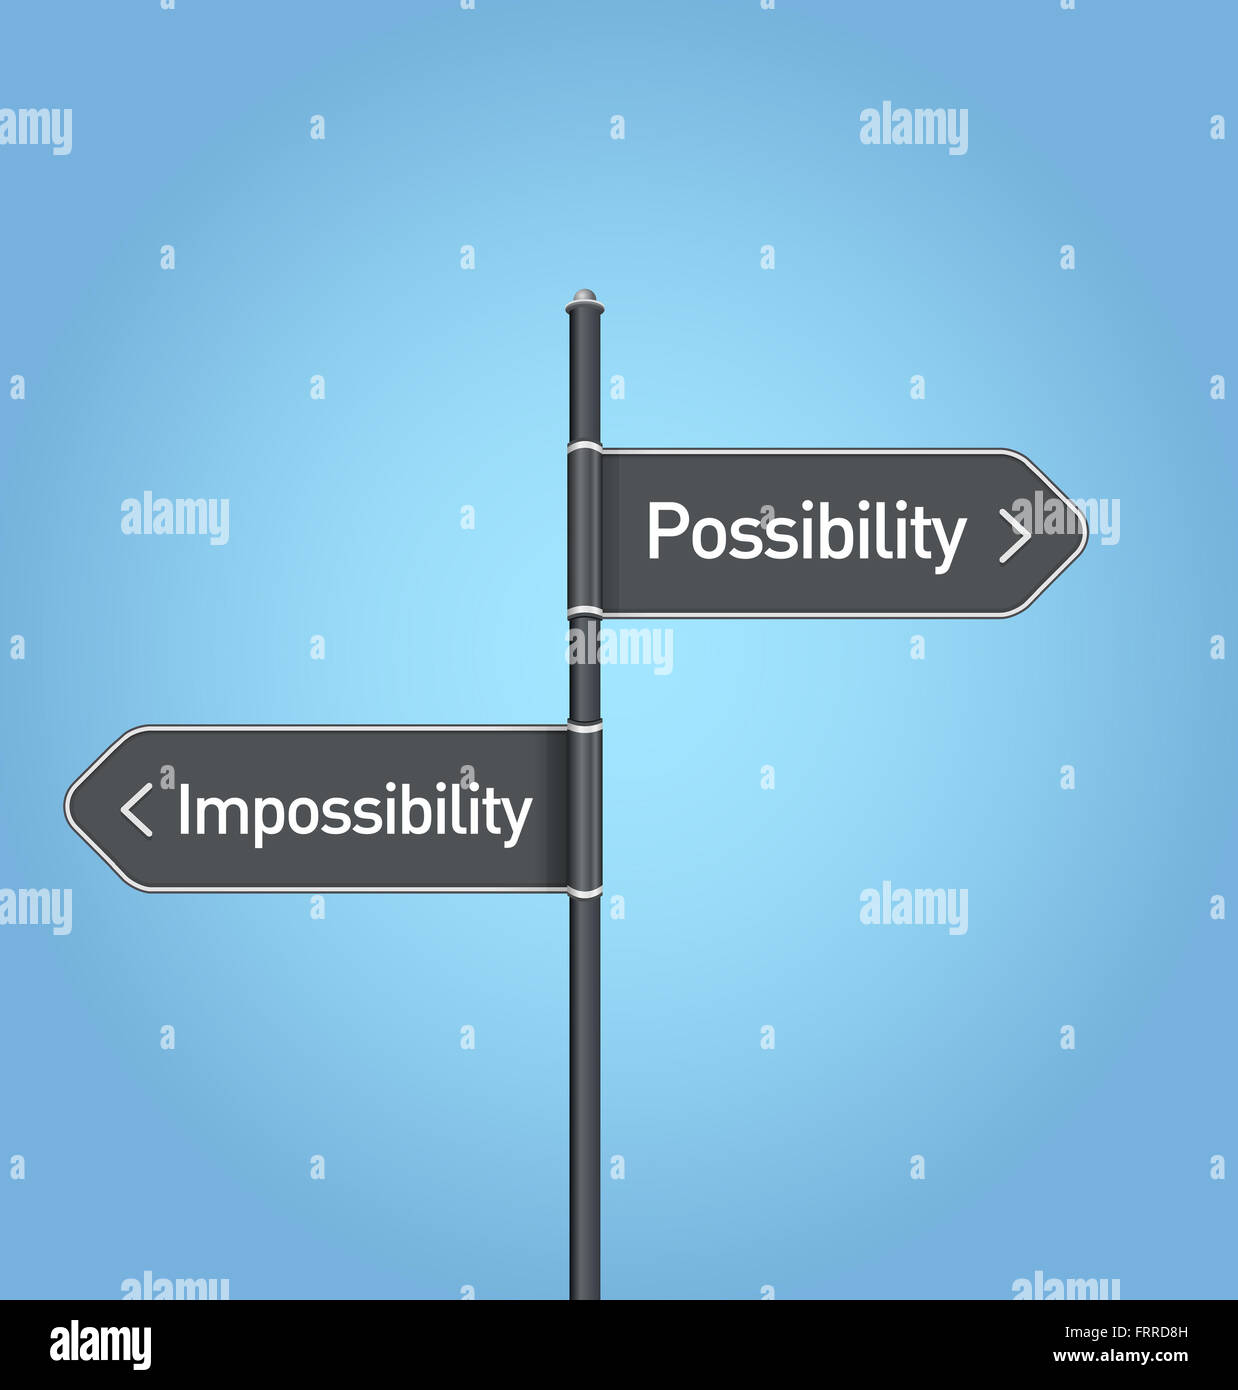 Possibility vs impossibility choice road sign concept, flat design Stock Photo